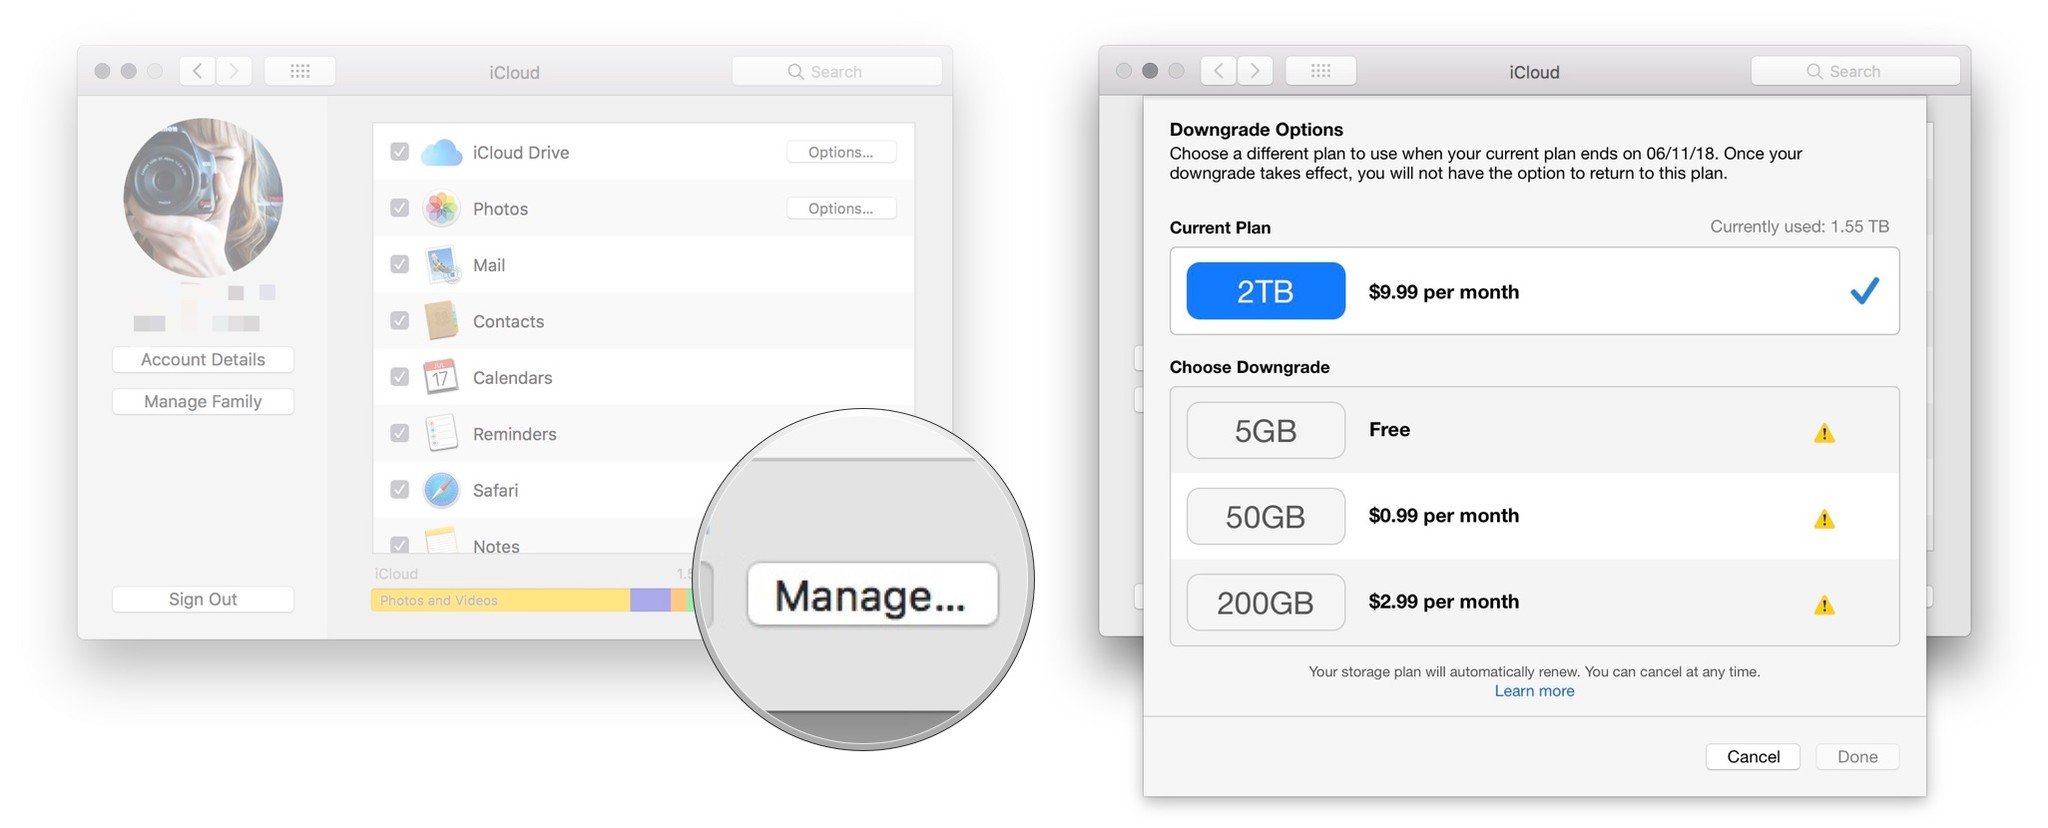 How to buy more iCloud storage on Mac by showing steps: Click Manage, click Change Storage Plan, choose a new plan